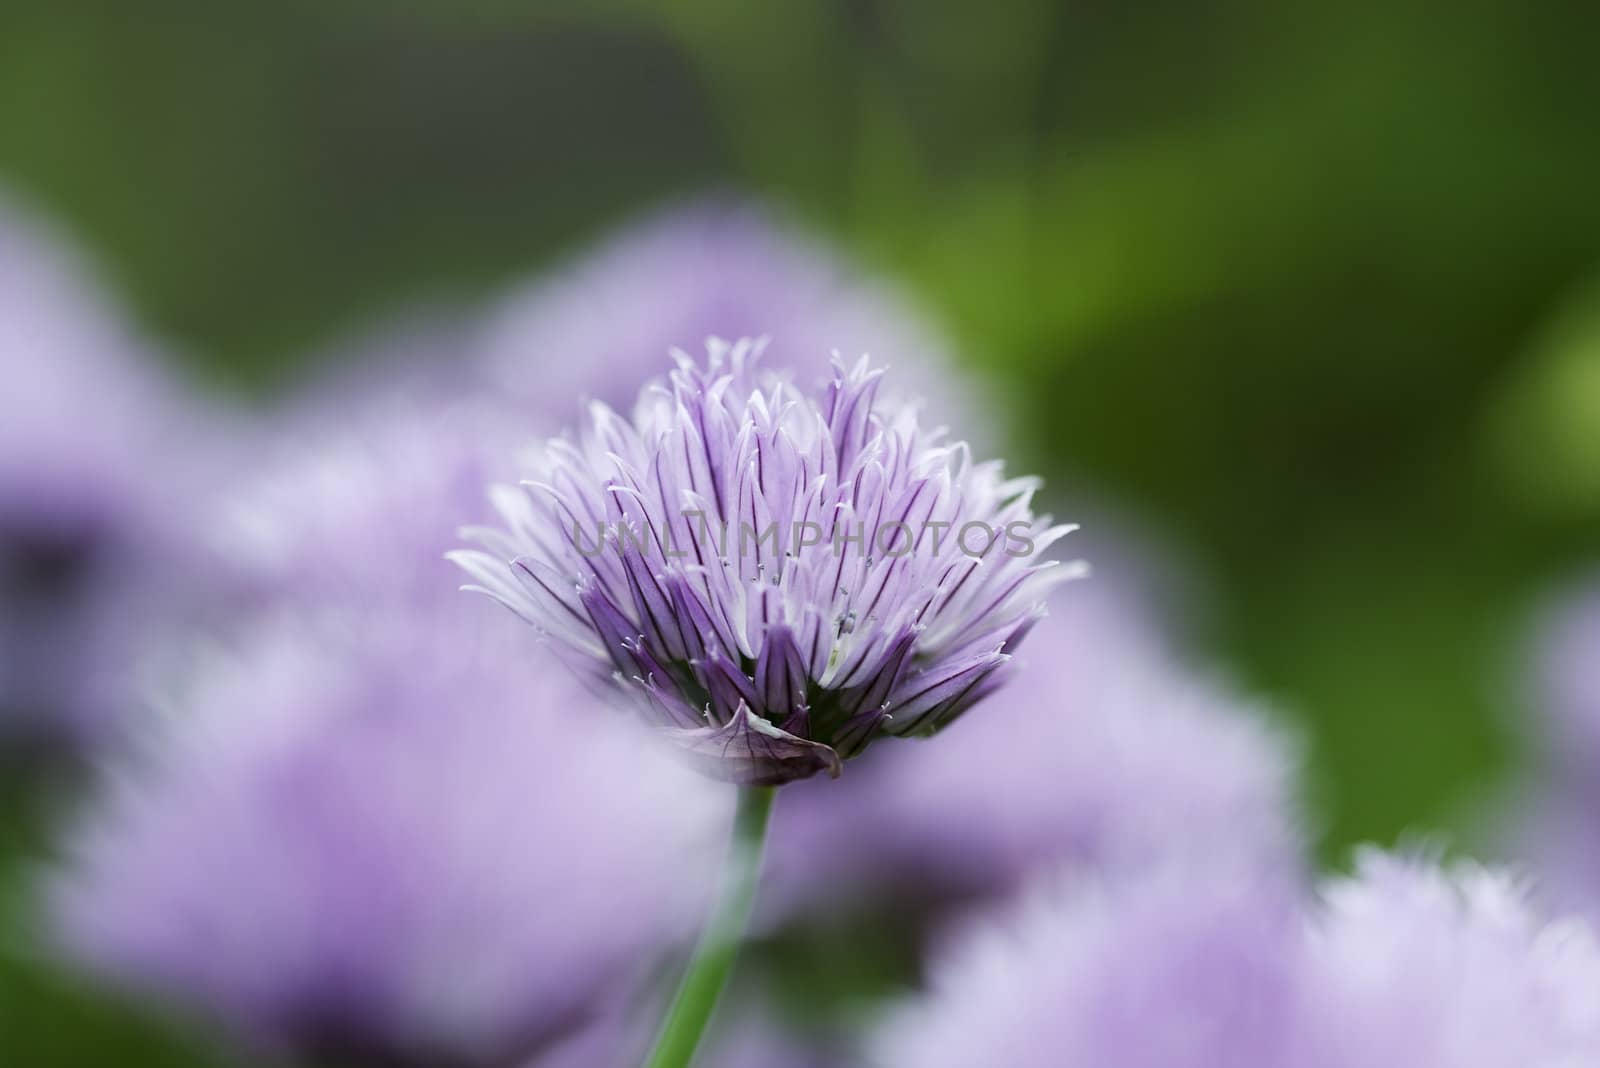 Chives decorative flowers by BDS